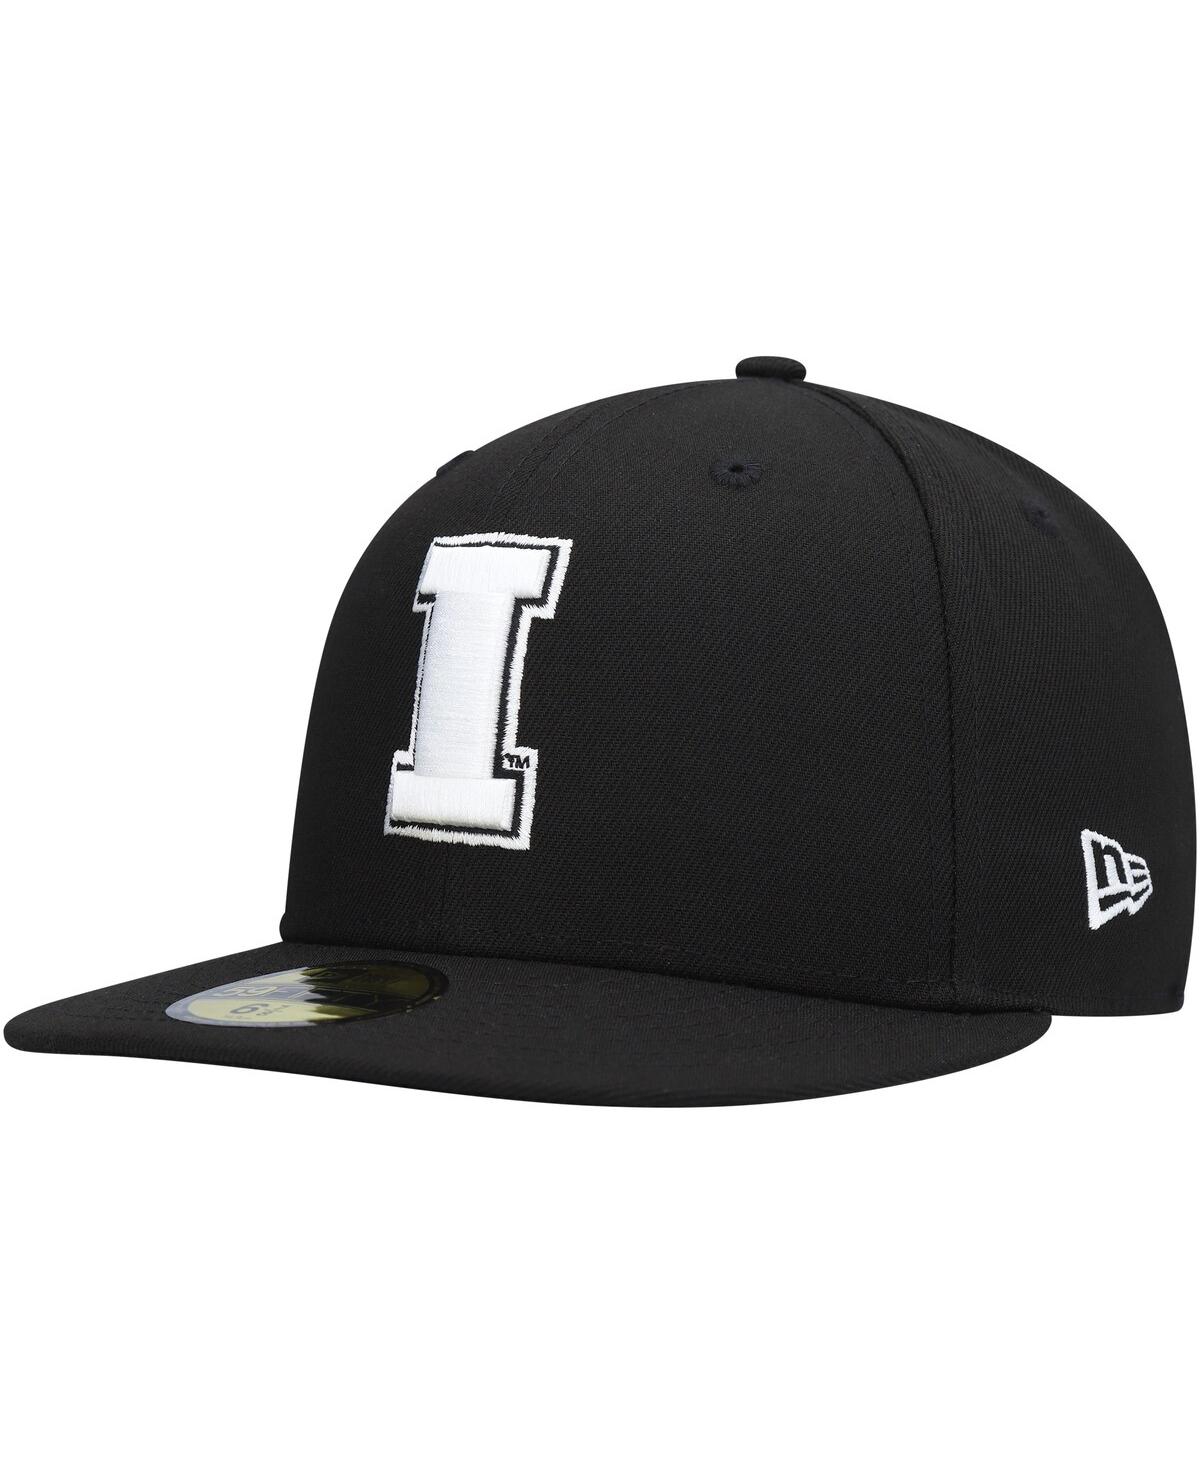 Shop New Era Men's  Iowa Hawkeyes Black And White 59fifty Fitted Hat